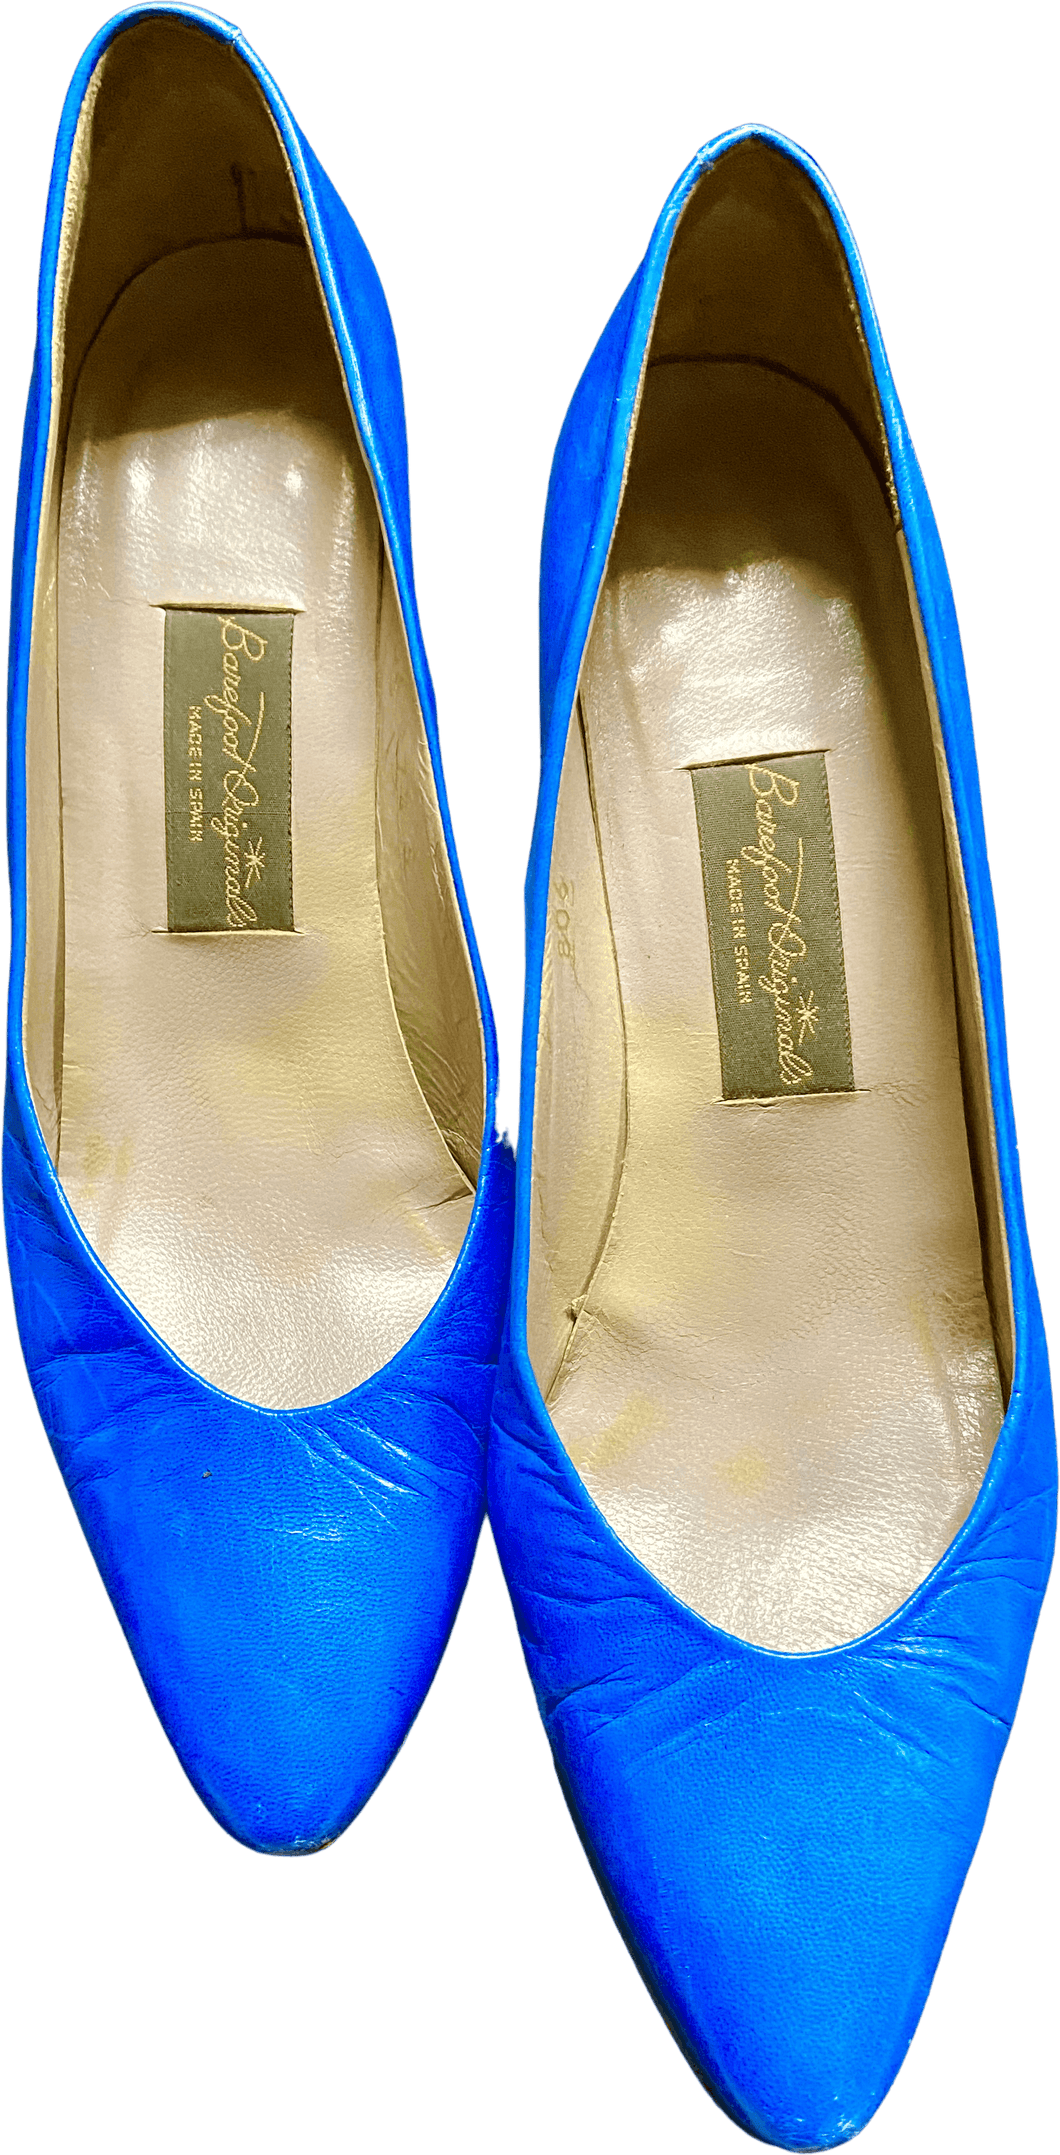 80’s Bright Blue Leather Heels by Barefoot Originals Made In Spain